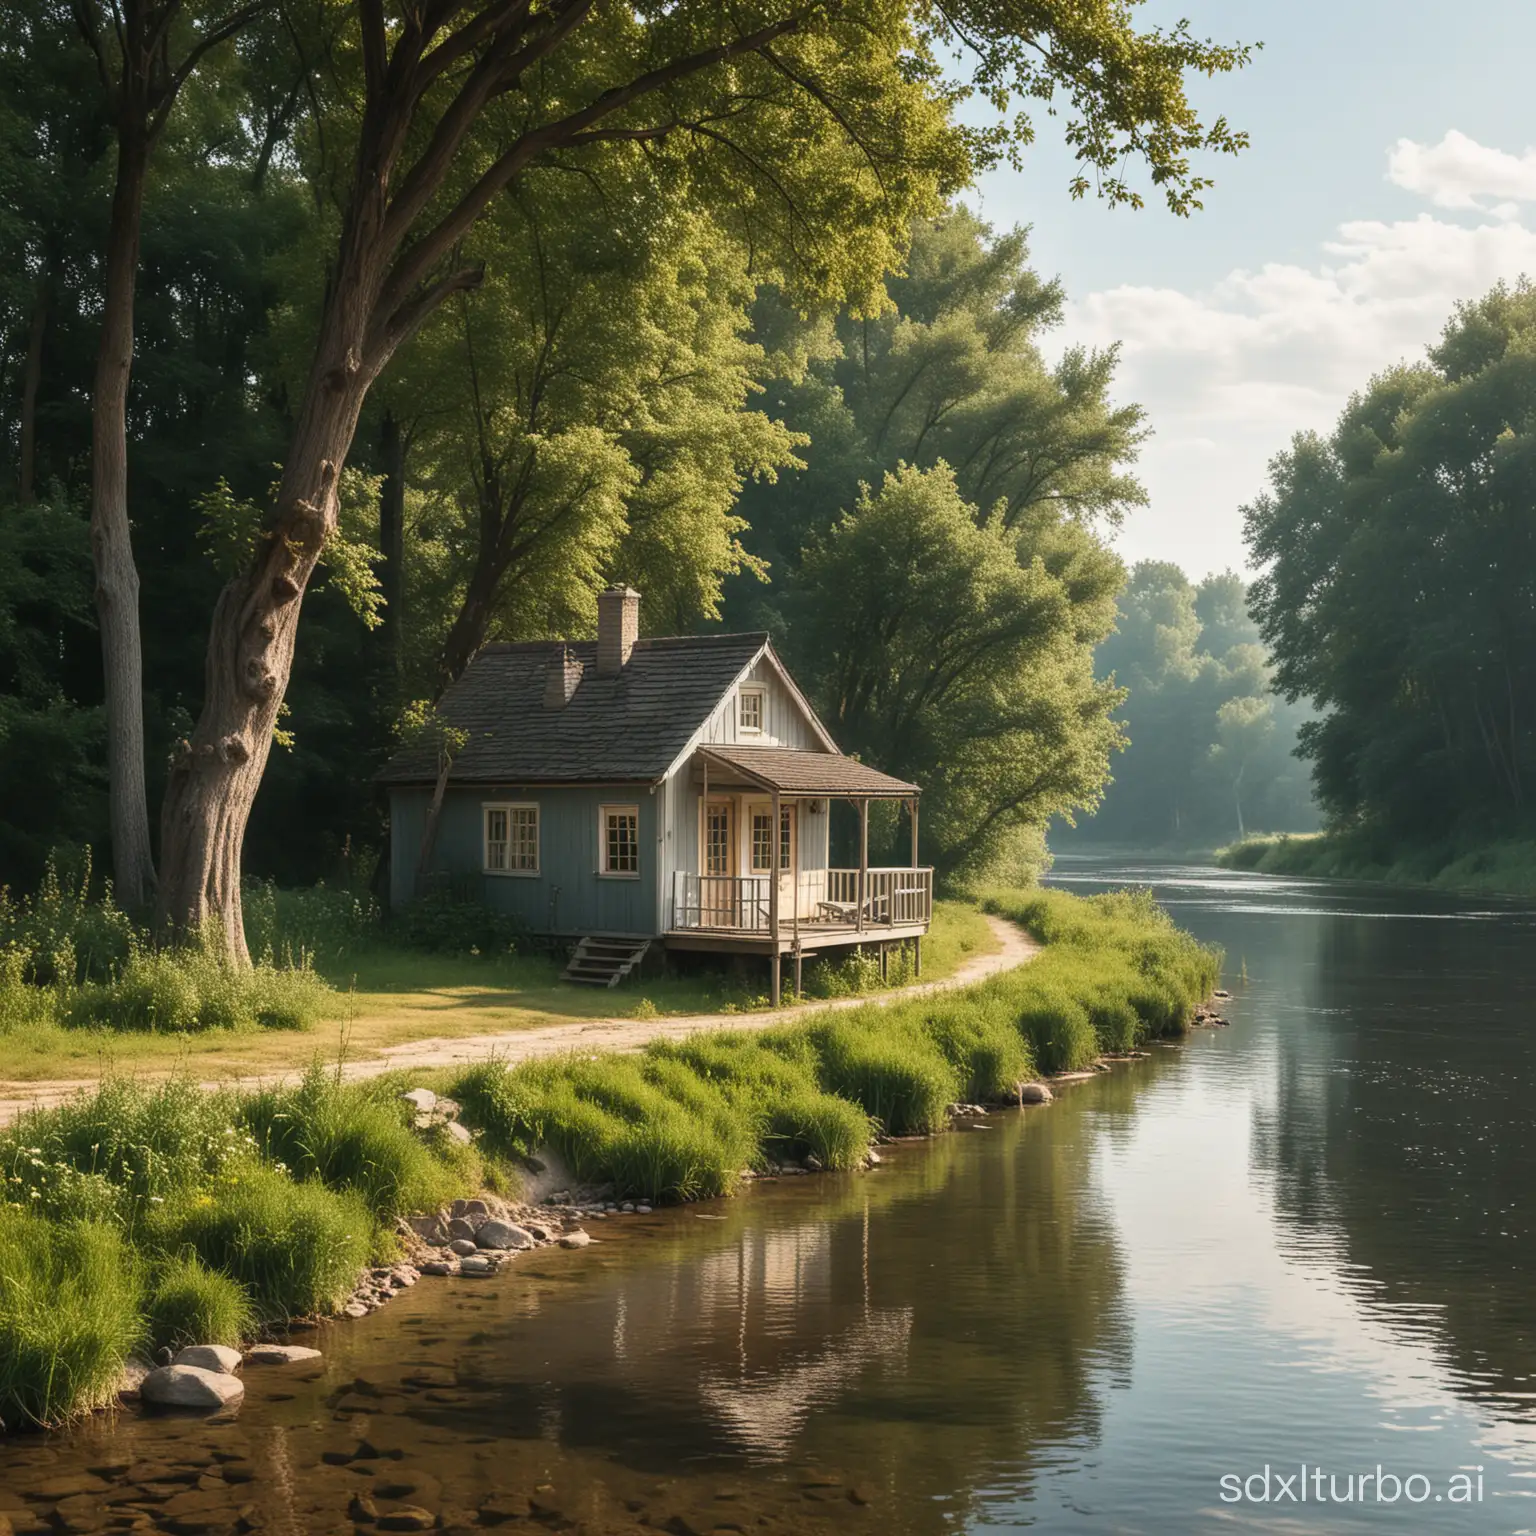 The small house by the river